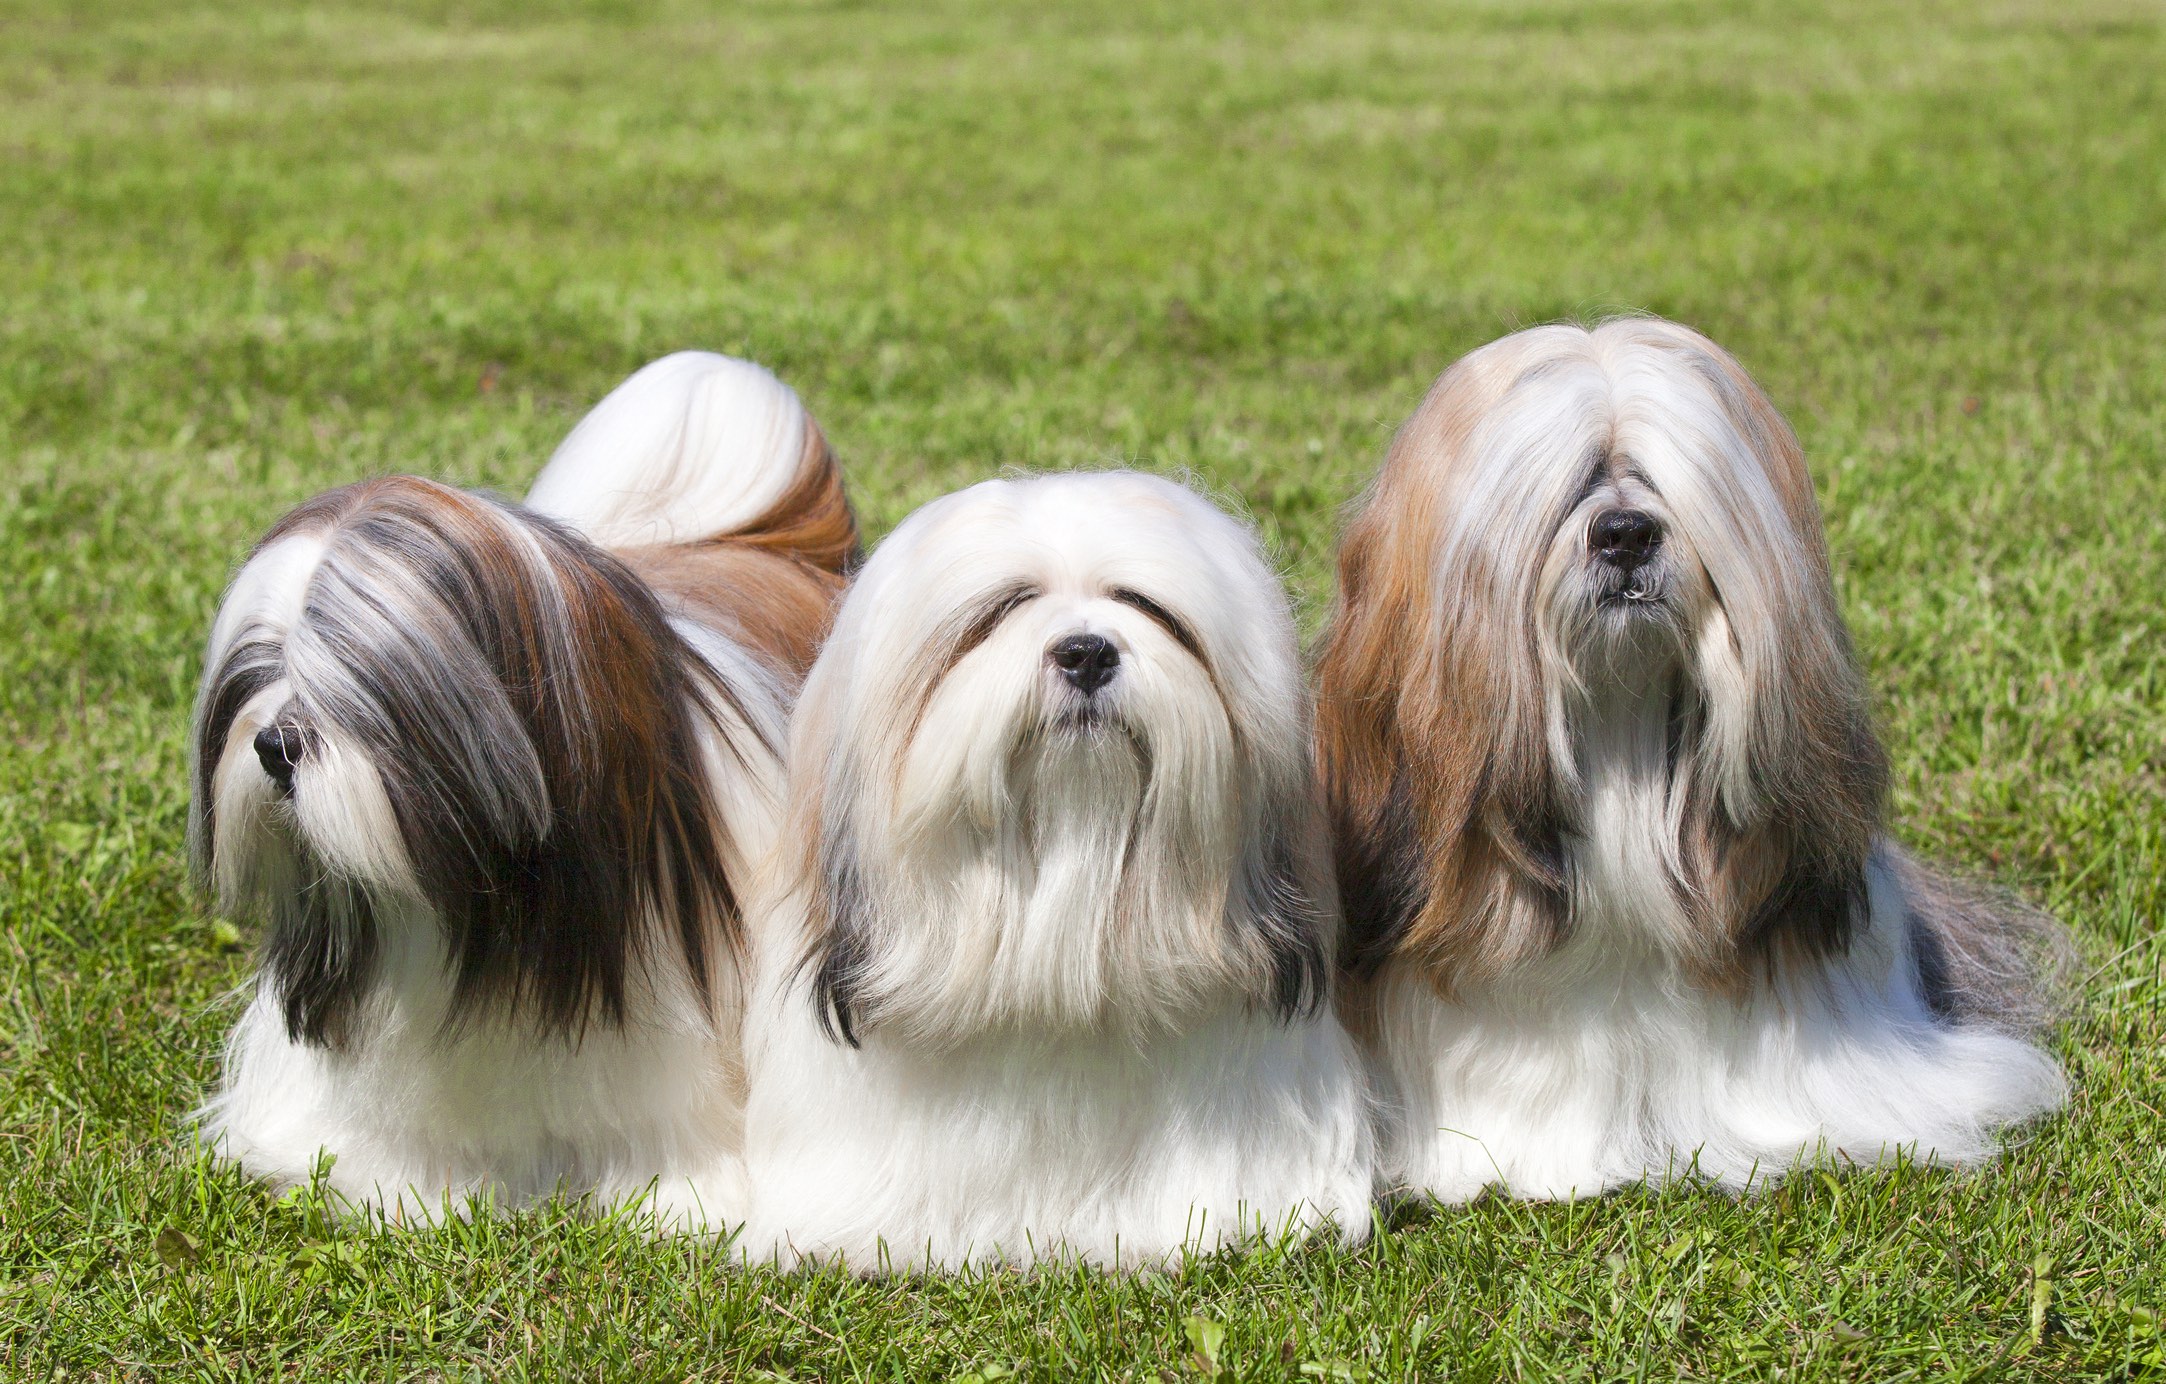 three long-haired lhasa apso dogs sitting in grass